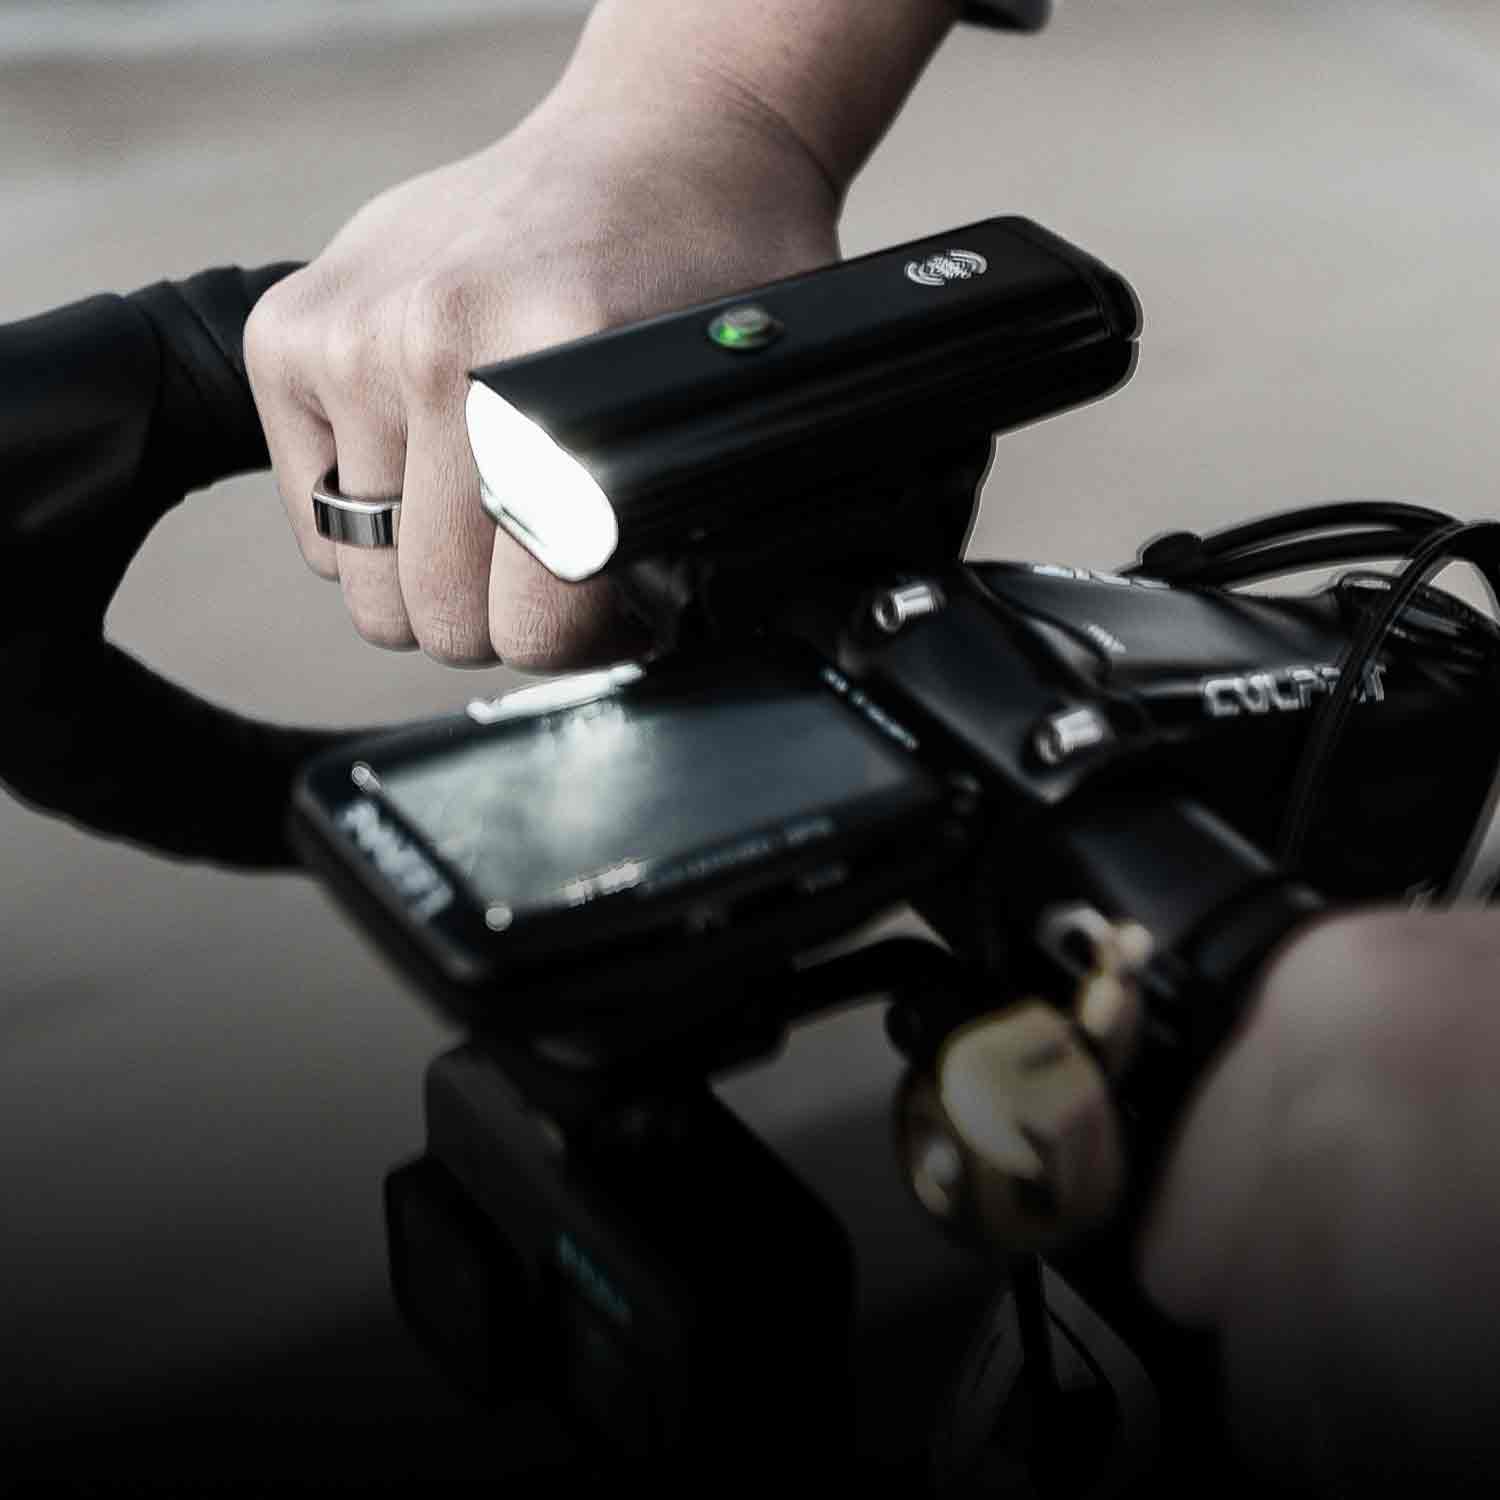 Hands on bicycle handlebars with a GPS computer and a bright front lite mounted to it.